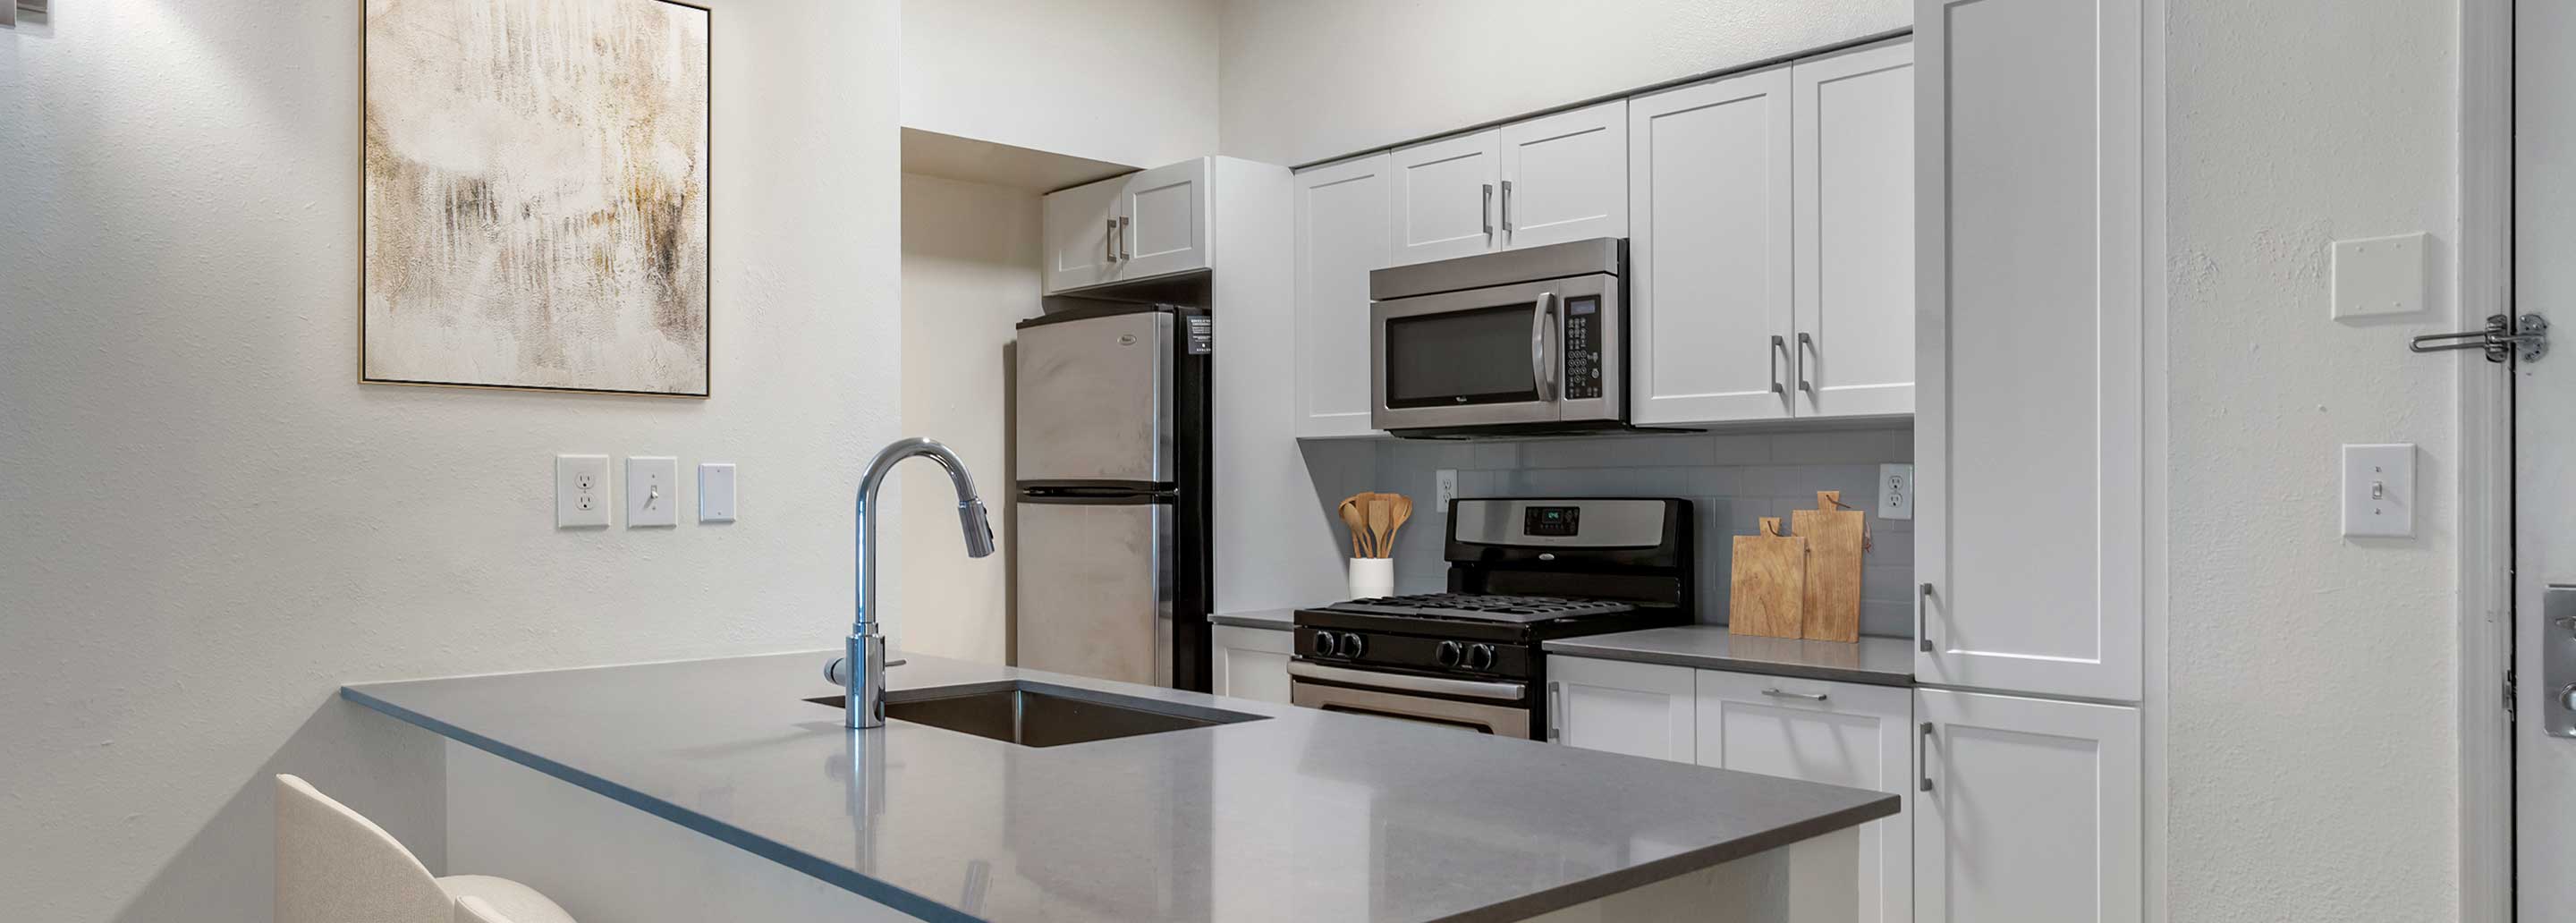 Renovated Package III kitchen with grey quartz countertops, white cabinetry, stainless steel appliances, tile backsplash, and hard surface plank flooring